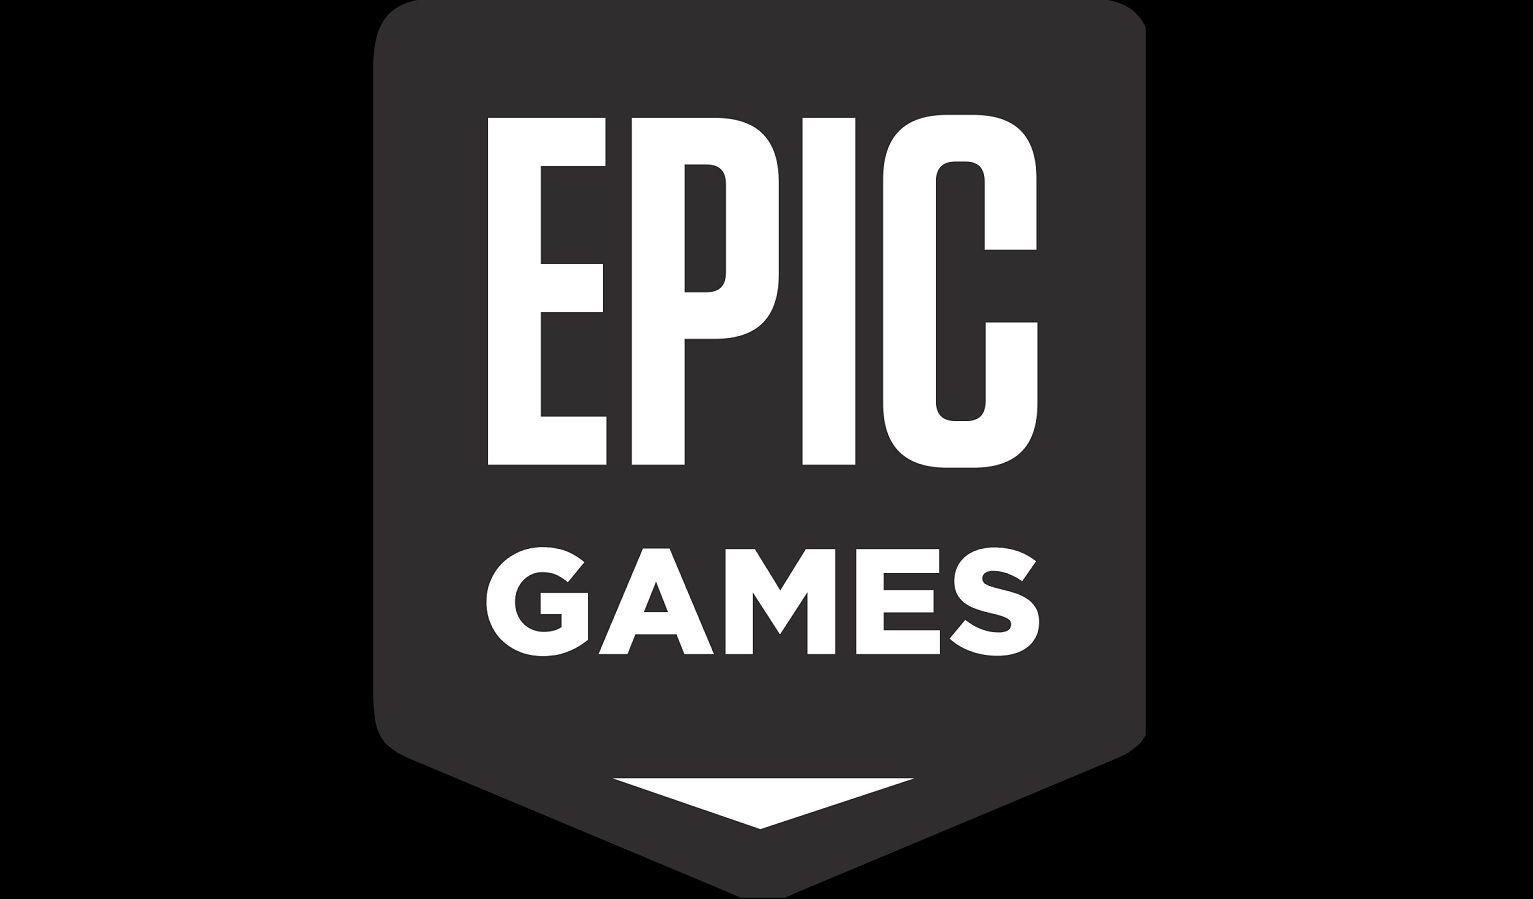 Games of Epic Games Logo - Epic Games has launched its own store to compete with Steam